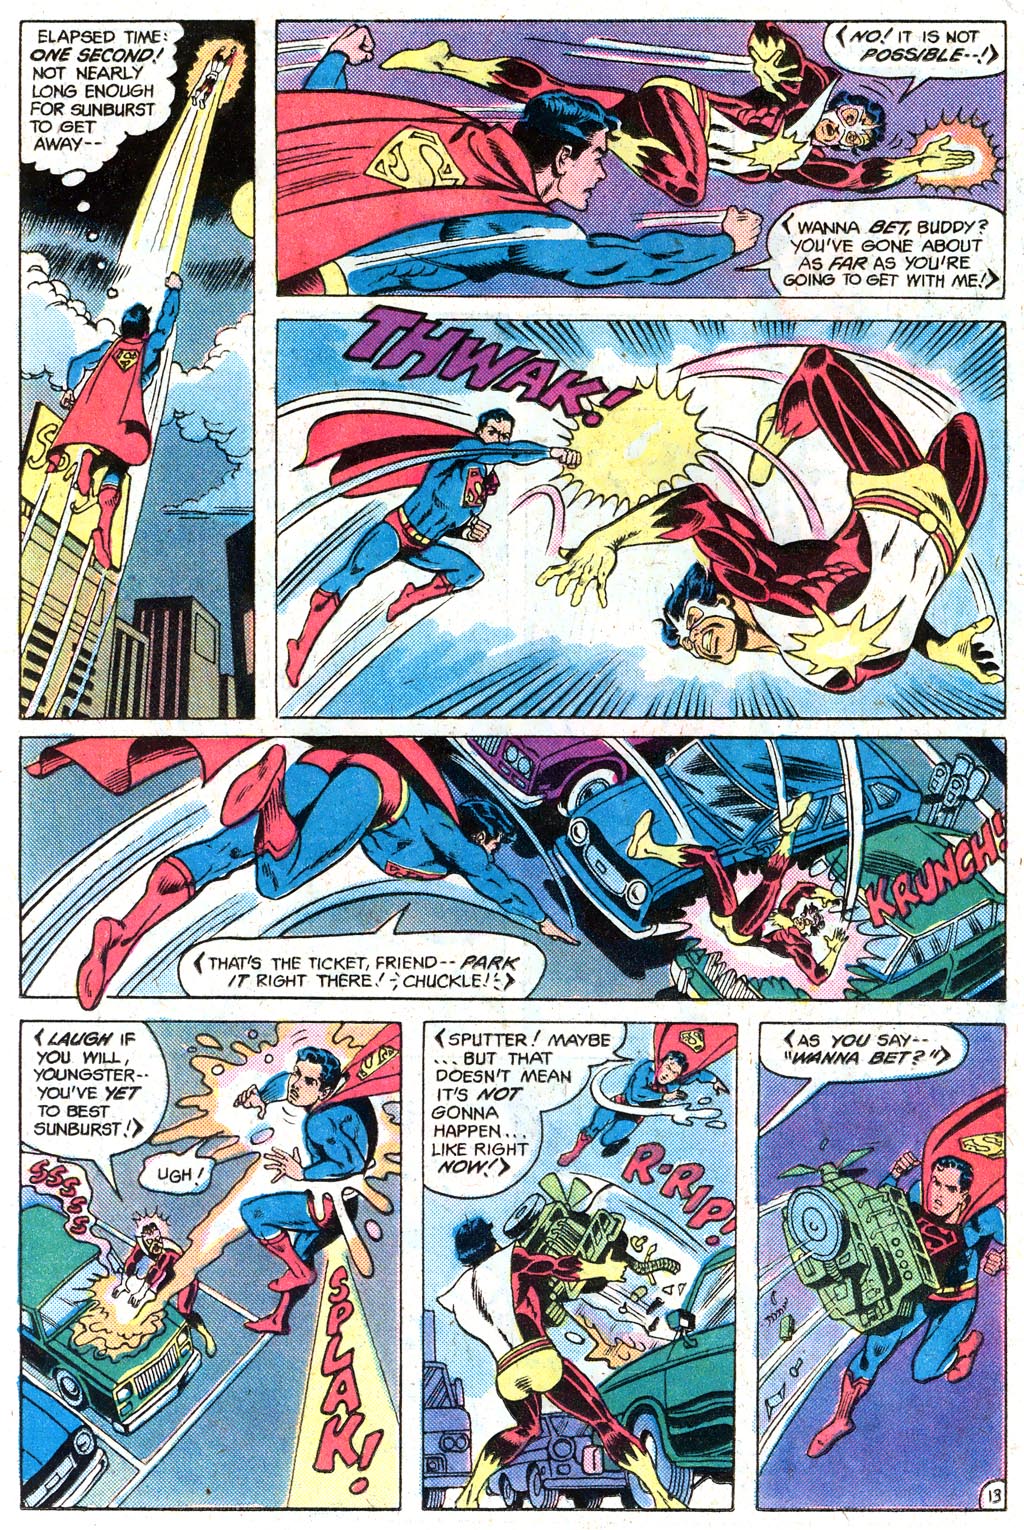 The New Adventures of Superboy 46 Page 17